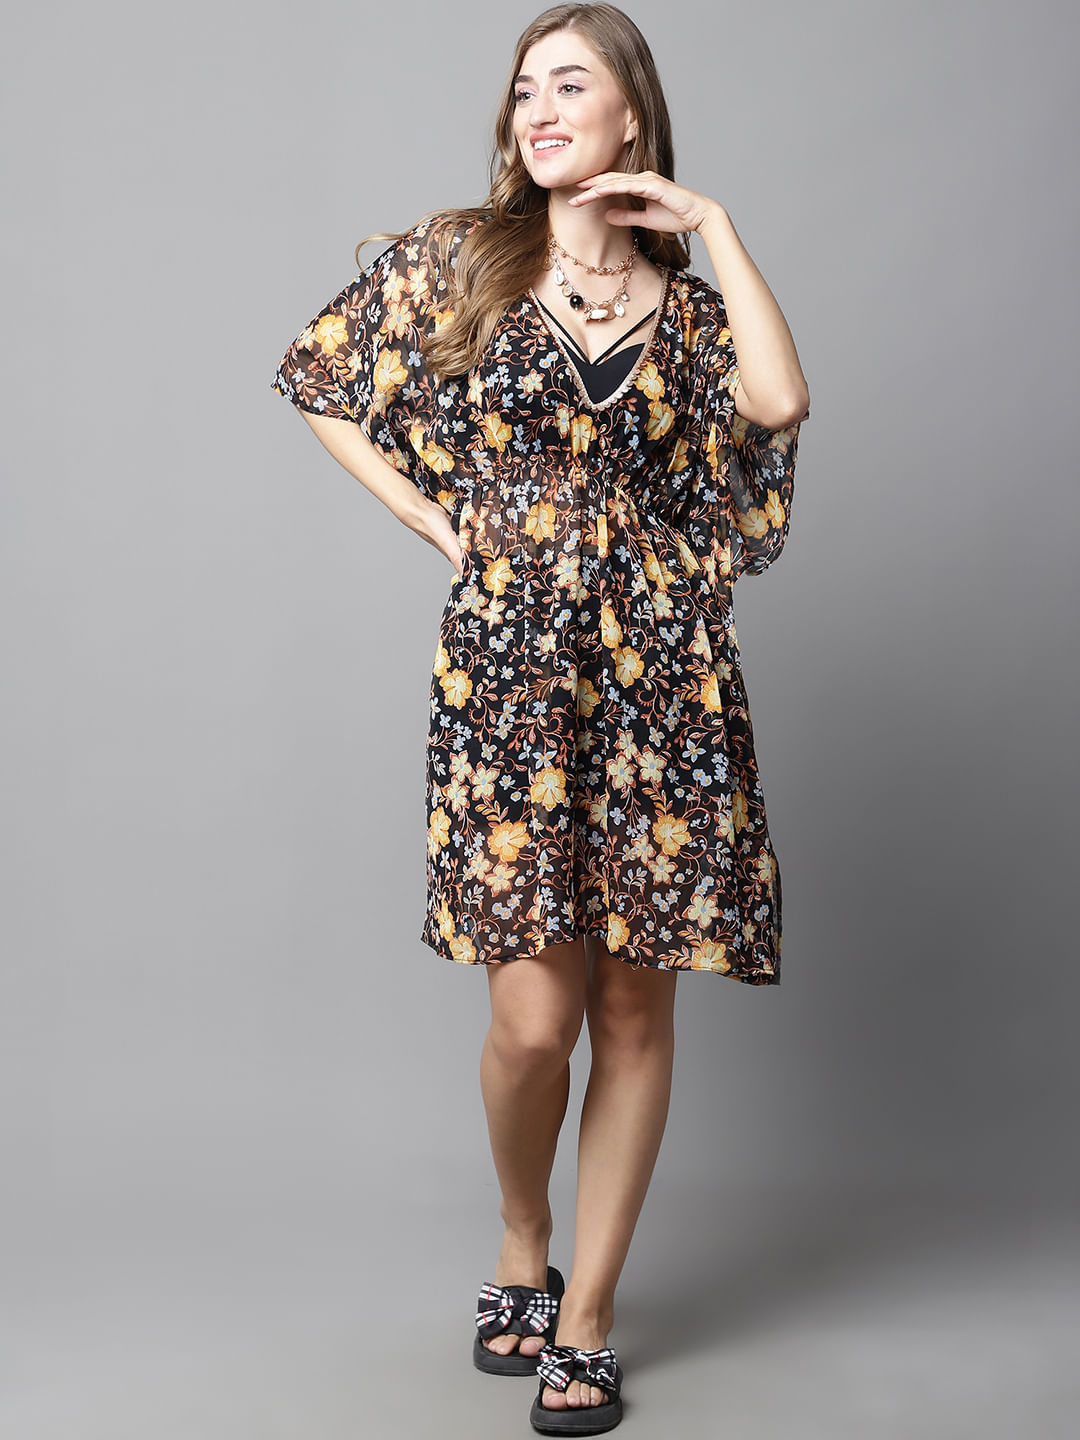 Black & Yellow Floral Cover Up Dress